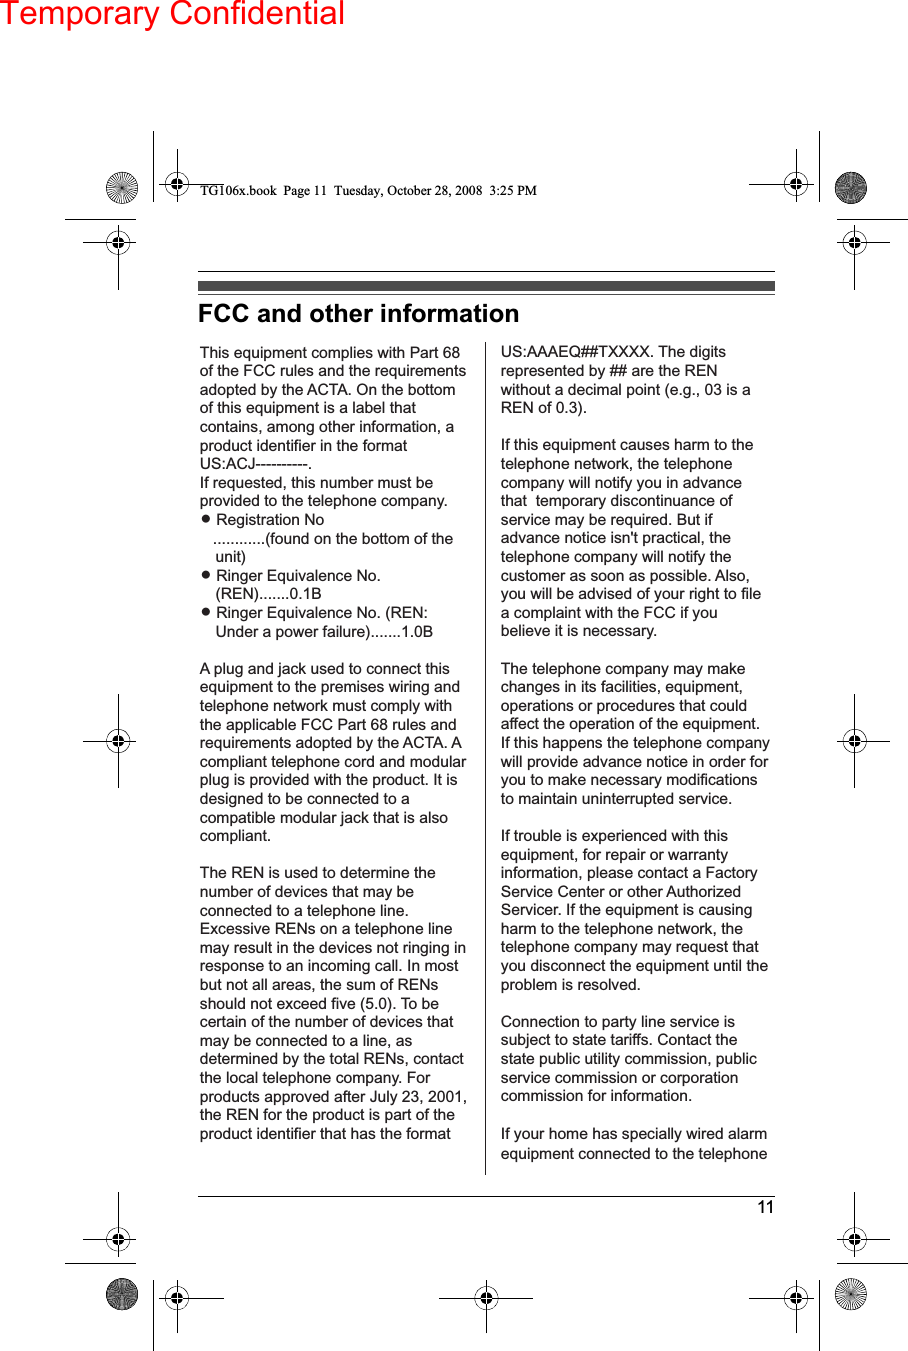 Temporary Confidential11FCC and other informationThis equipment complies with Part 68 of the FCC rules and the requirements adopted by the ACTA. On the bottom of this equipment is a label that contains, among other information, a product identifier in the format US:ACJ----------.If requested, this number must be provided to the telephone company.L Registration No   ............(found on the bottom of the unit)L Ringer Equivalence No.(REN).......0.1BL Ringer Equivalence No. (REN: Under a power failure).......1.0BA plug and jack used to connect this equipment to the premises wiring and telephone network must comply with the applicable FCC Part 68 rules and requirements adopted by the ACTA. A compliant telephone cord and modular plug is provided with the product. It is designed to be connected to a compatible modular jack that is also compliant.The REN is used to determine the number of devices that may be connected to a telephone line. Excessive RENs on a telephone line may result in the devices not ringing in response to an incoming call. In most but not all areas, the sum of RENs should not exceed five (5.0). To be certain of the number of devices that may be connected to a line, as determined by the total RENs, contact the local telephone company. For products approved after July 23, 2001, the REN for the product is part of the product identifier that has the format US:AAAEQ##TXXXX. The digits represented by ## are the REN without a decimal point (e.g., 03 is a REN of 0.3).If this equipment causes harm to the telephone network, the telephone company will notify you in advance that  temporary discontinuance of service may be required. But if advance notice isn&apos;t practical, the telephone company will notify the customer as soon as possible. Also, you will be advised of your right to file a complaint with the FCC if you believe it is necessary.The telephone company may make changes in its facilities, equipment, operations or procedures that could affect the operation of the equipment. If this happens the telephone company will provide advance notice in order for you to make necessary modifications to maintain uninterrupted service.If trouble is experienced with this equipment, for repair or warranty information, please contact a Factory Service Center or other Authorized Servicer. If the equipment is causing harm to the telephone network, the telephone company may request that you disconnect the equipment until the problem is resolved.Connection to party line service is subject to state tariffs. Contact the state public utility commission, public service commission or corporation commission for information.If your home has specially wired alarm equipment connected to the telephoneTG106x.book  Page 11  Tuesday, October 28, 2008  3:25 PM